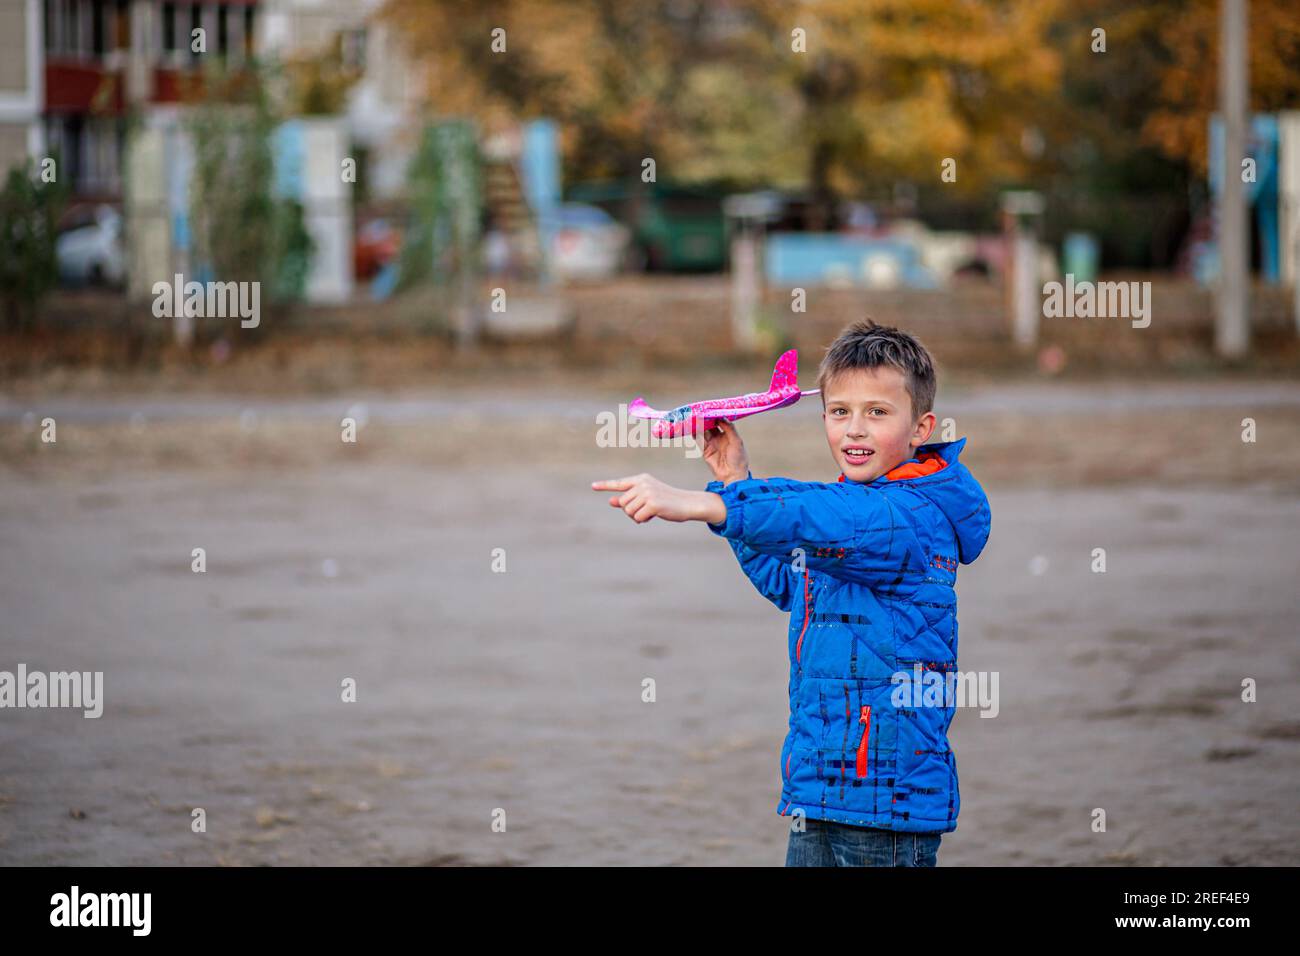 boy joyfully launches his toy plane at the stadium in autumn. Childhood Stock Photo